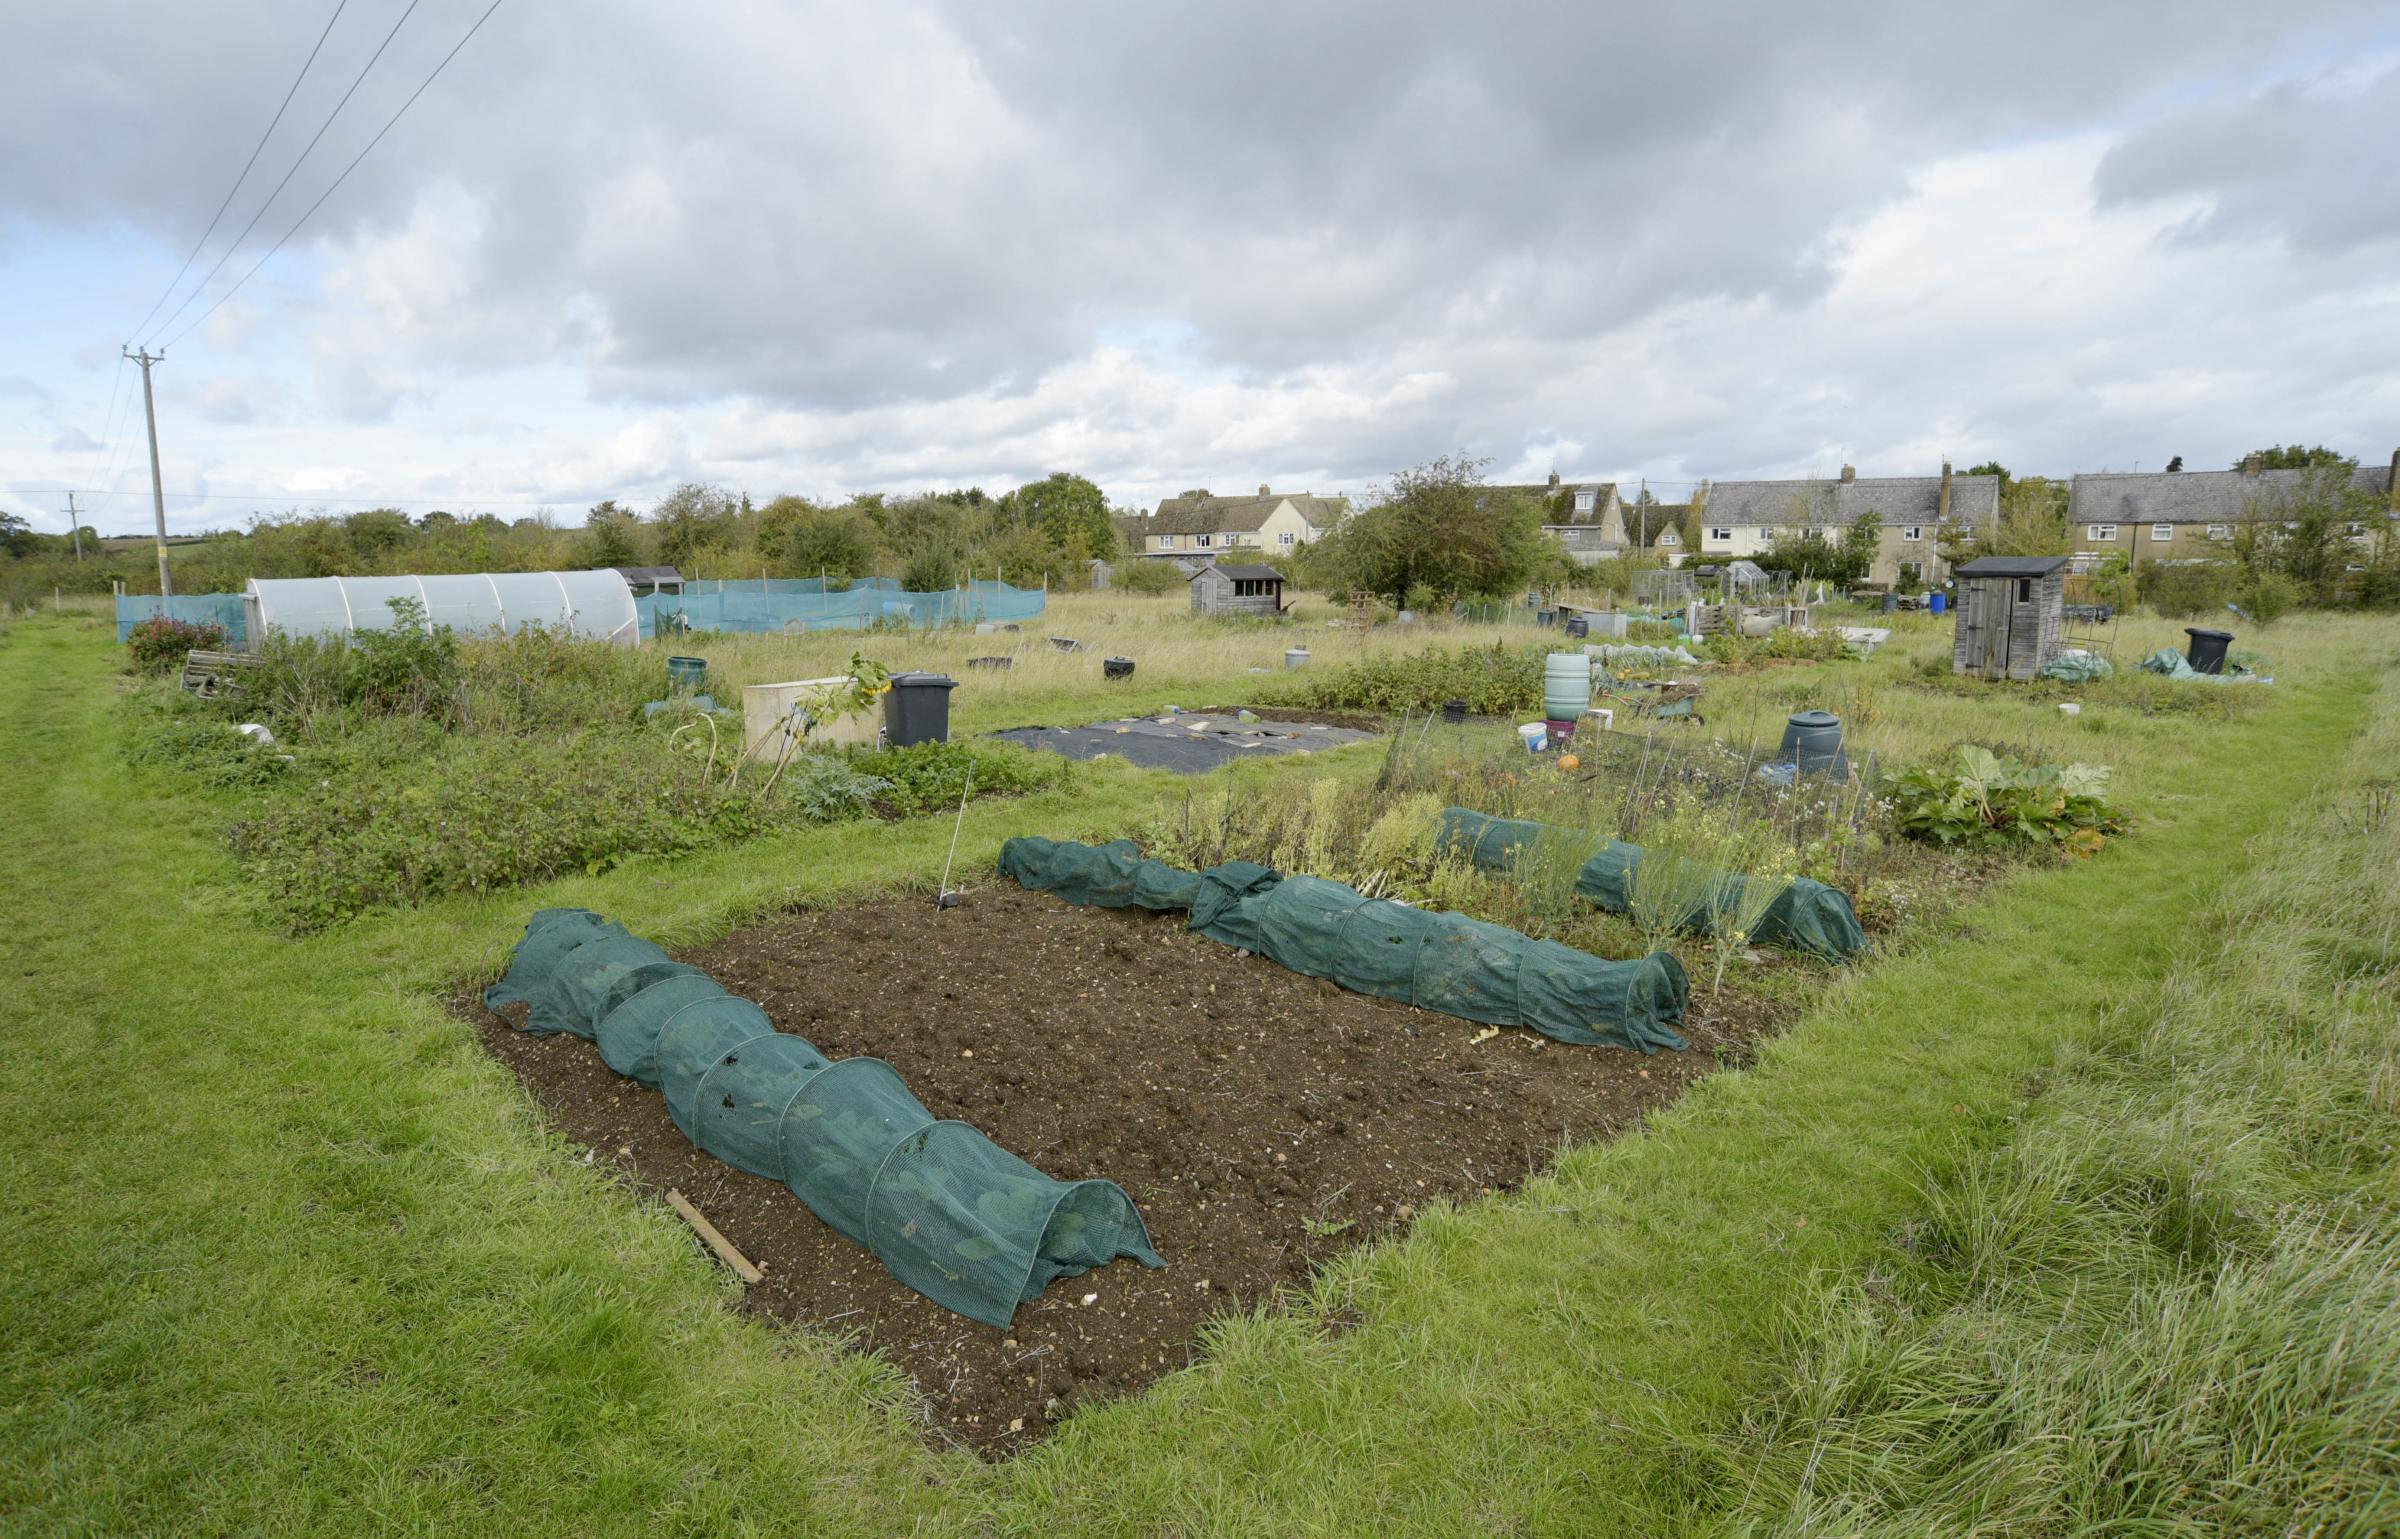 Cassington residents are angry over plans by the Blenheim Estate to build on the village allotments. Picture: David Fleming